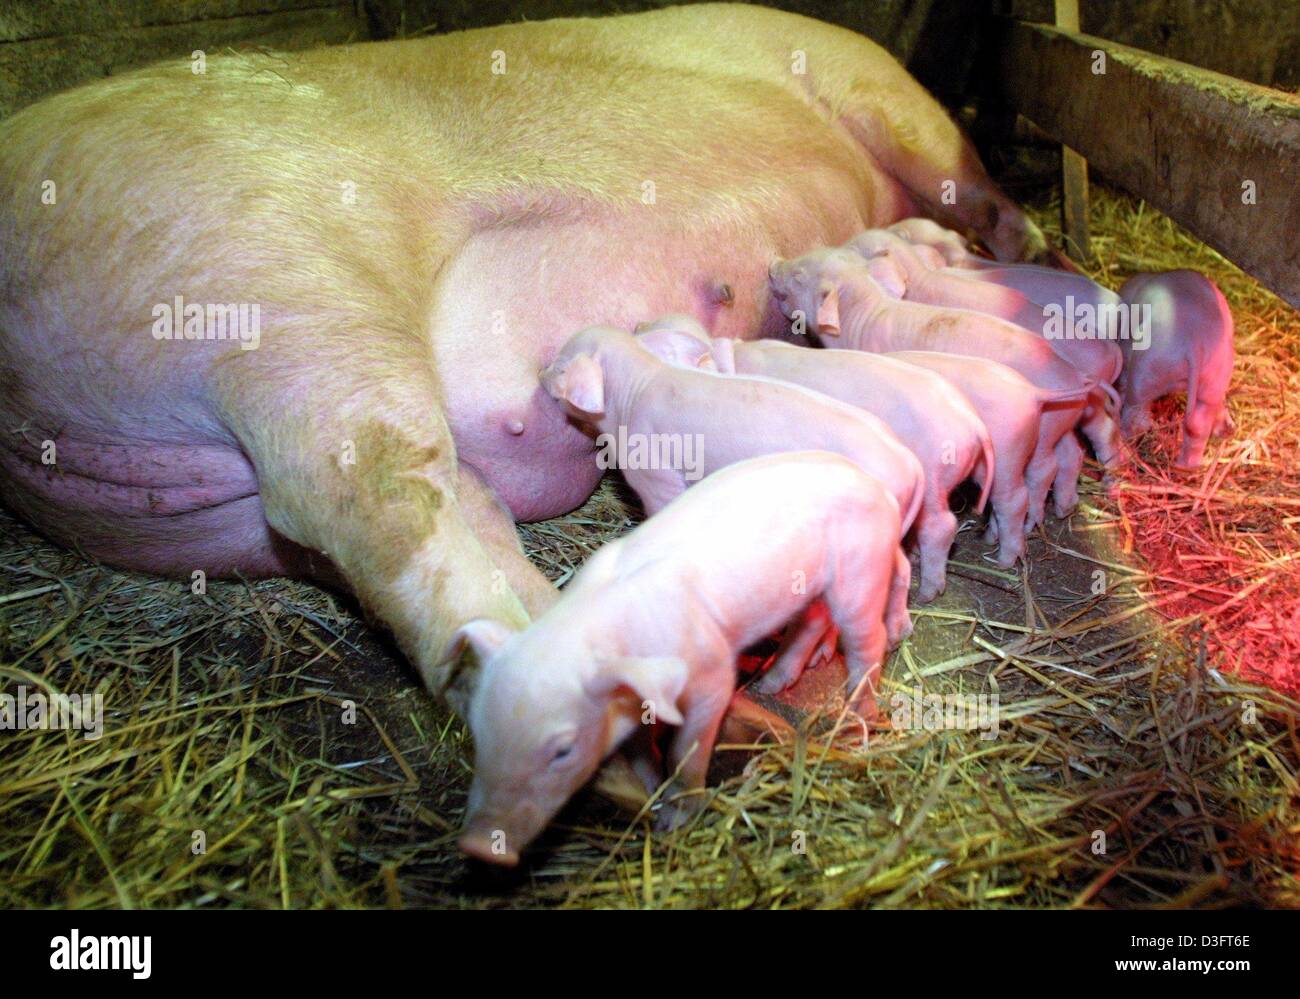 (dpa) - A sow lactates altogether 14 hungry piglets at a farm in Tennenbronn in the Black Forest, Germany, 20 February 2003. The three-and-a-half-year-old sow has given birth to a litter of 25 piglets in the night to 17 February. Six of the piglets died shortly after their birth. As the sow can lactate only 14 piglets, the other baby pigs were brought to another stable. The inoffic Stock Photo